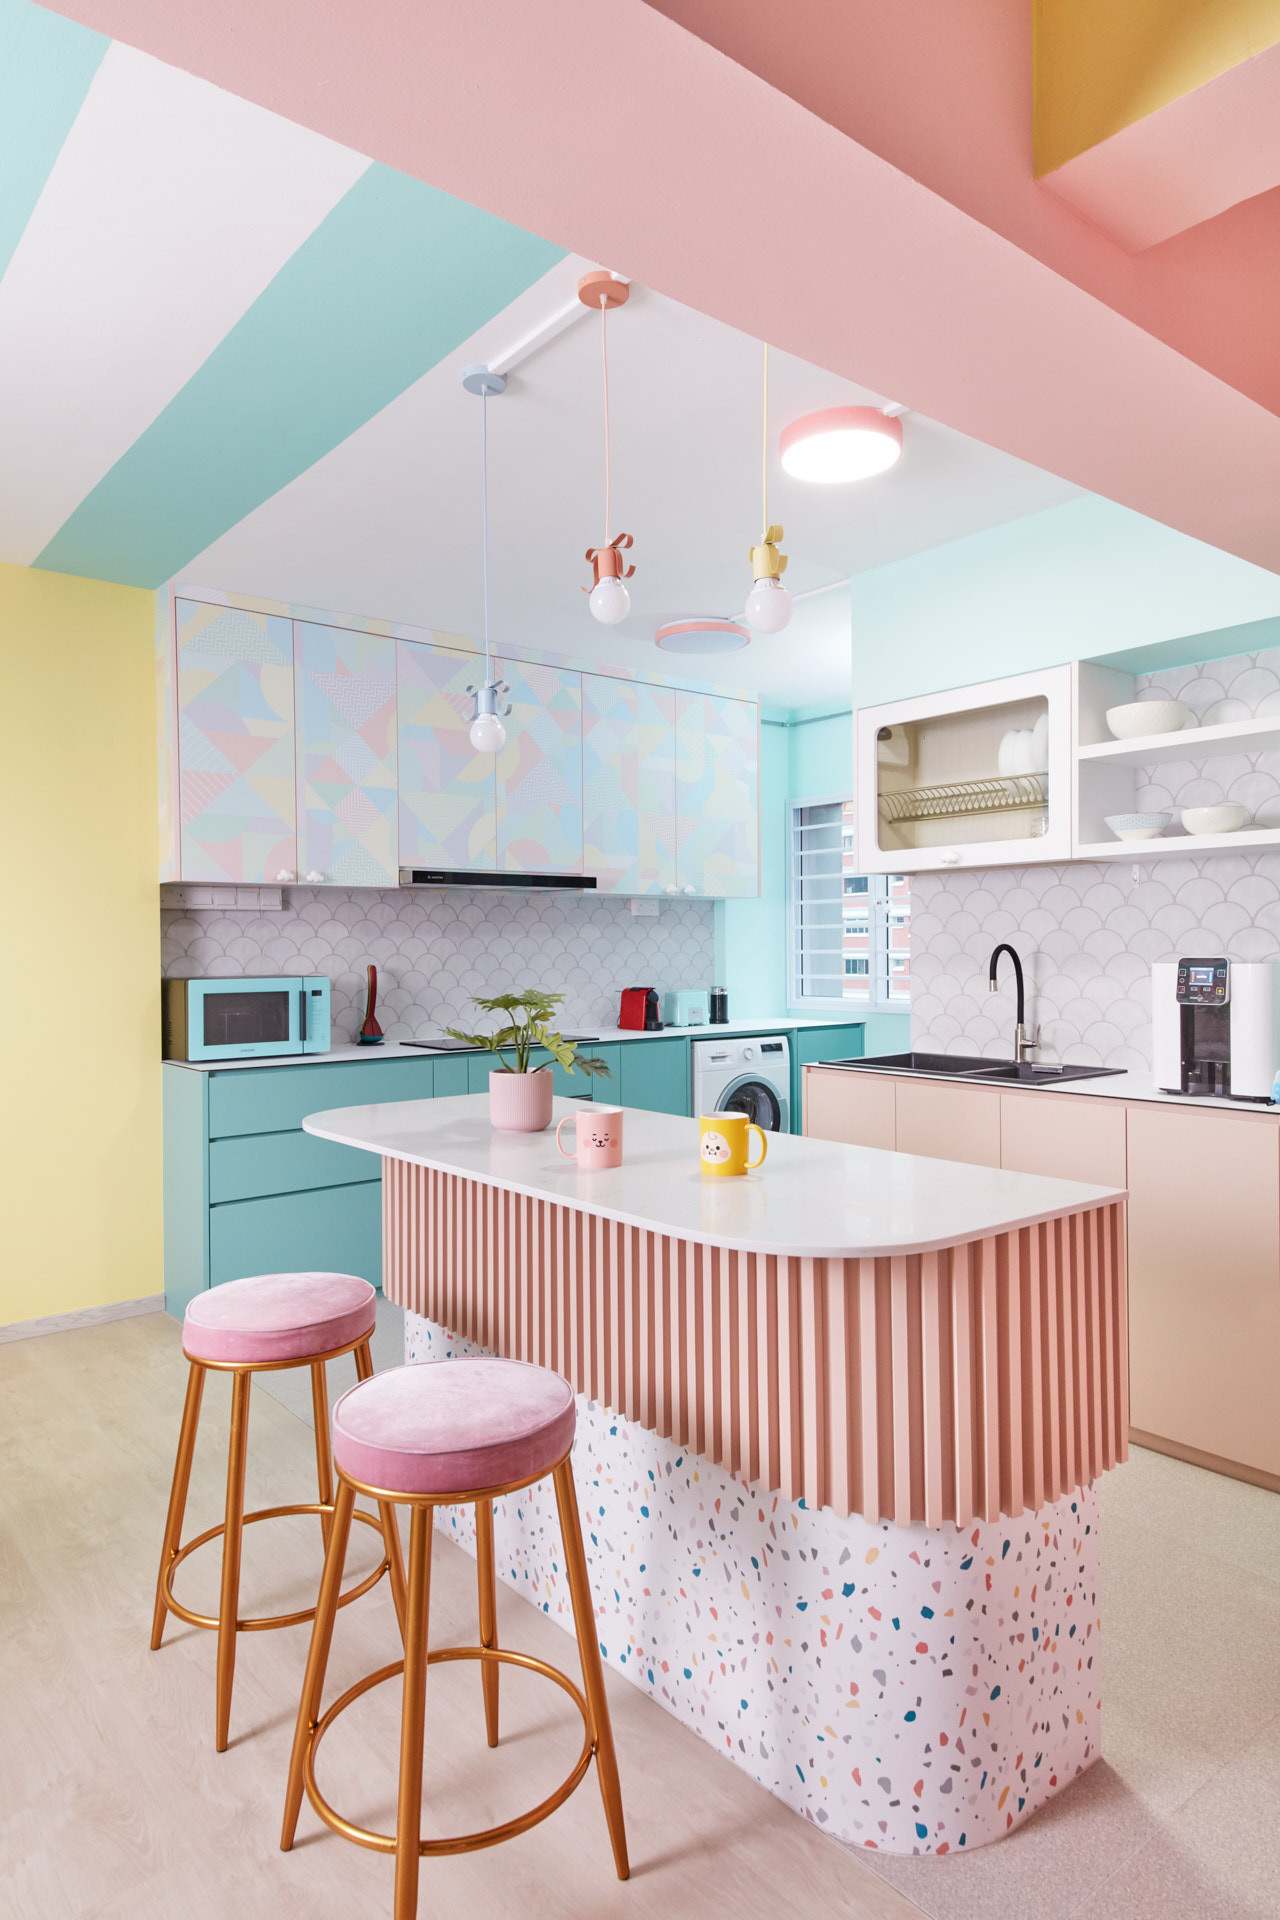 Mint Green Tiles and Cream Appliances Bring Retro Charm Back to This 1950s  Kitchen